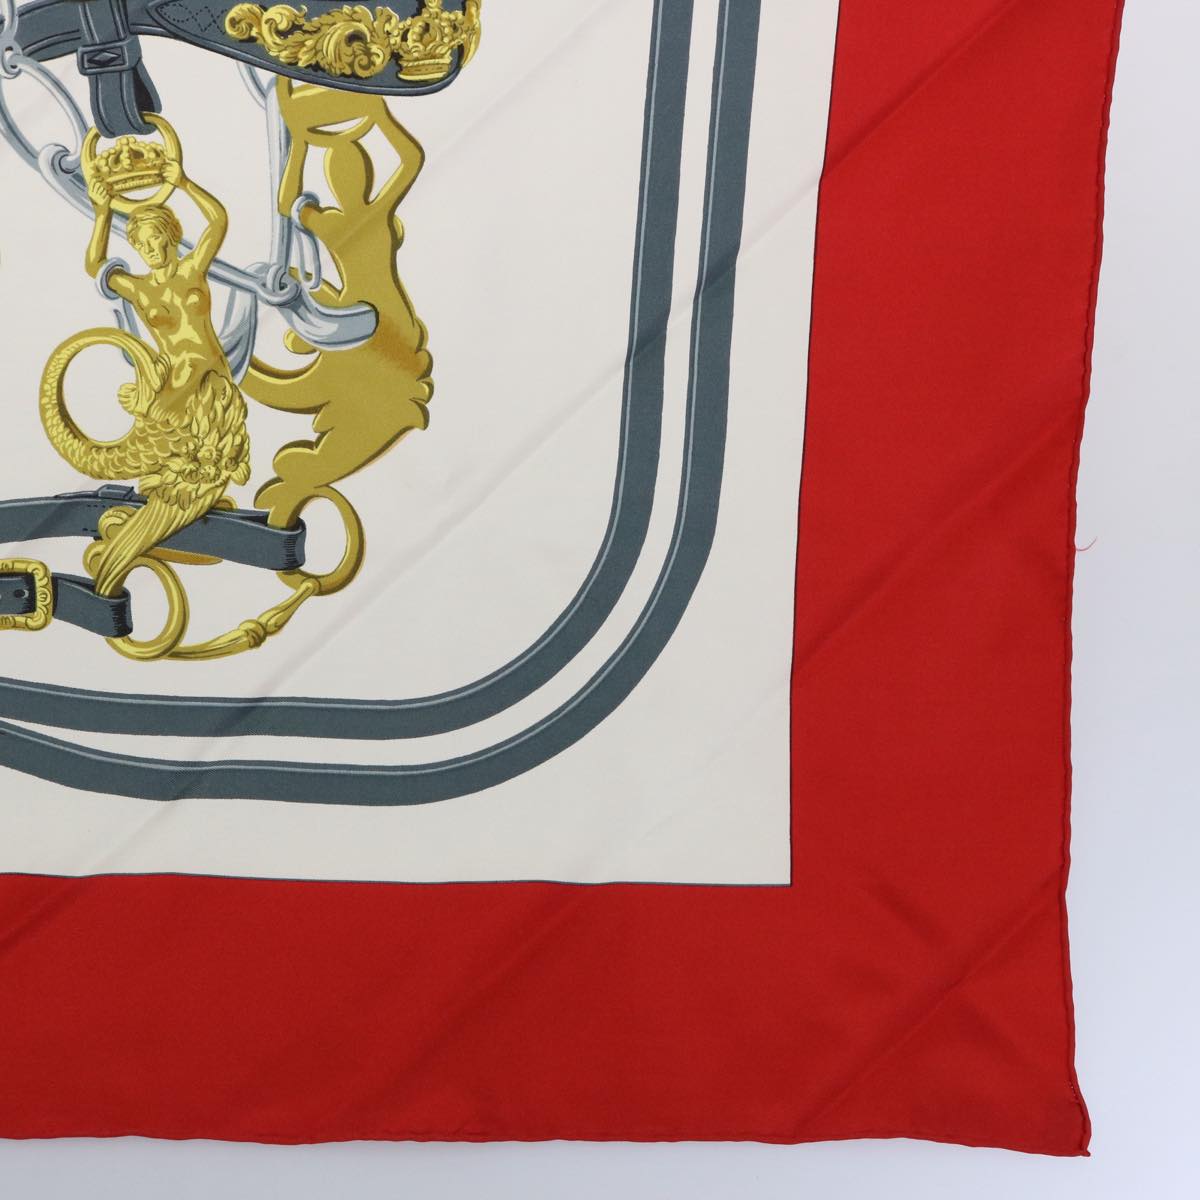 HERMES Carre 90 BRIDES de GALA Scarf Silk Red Auth uy165